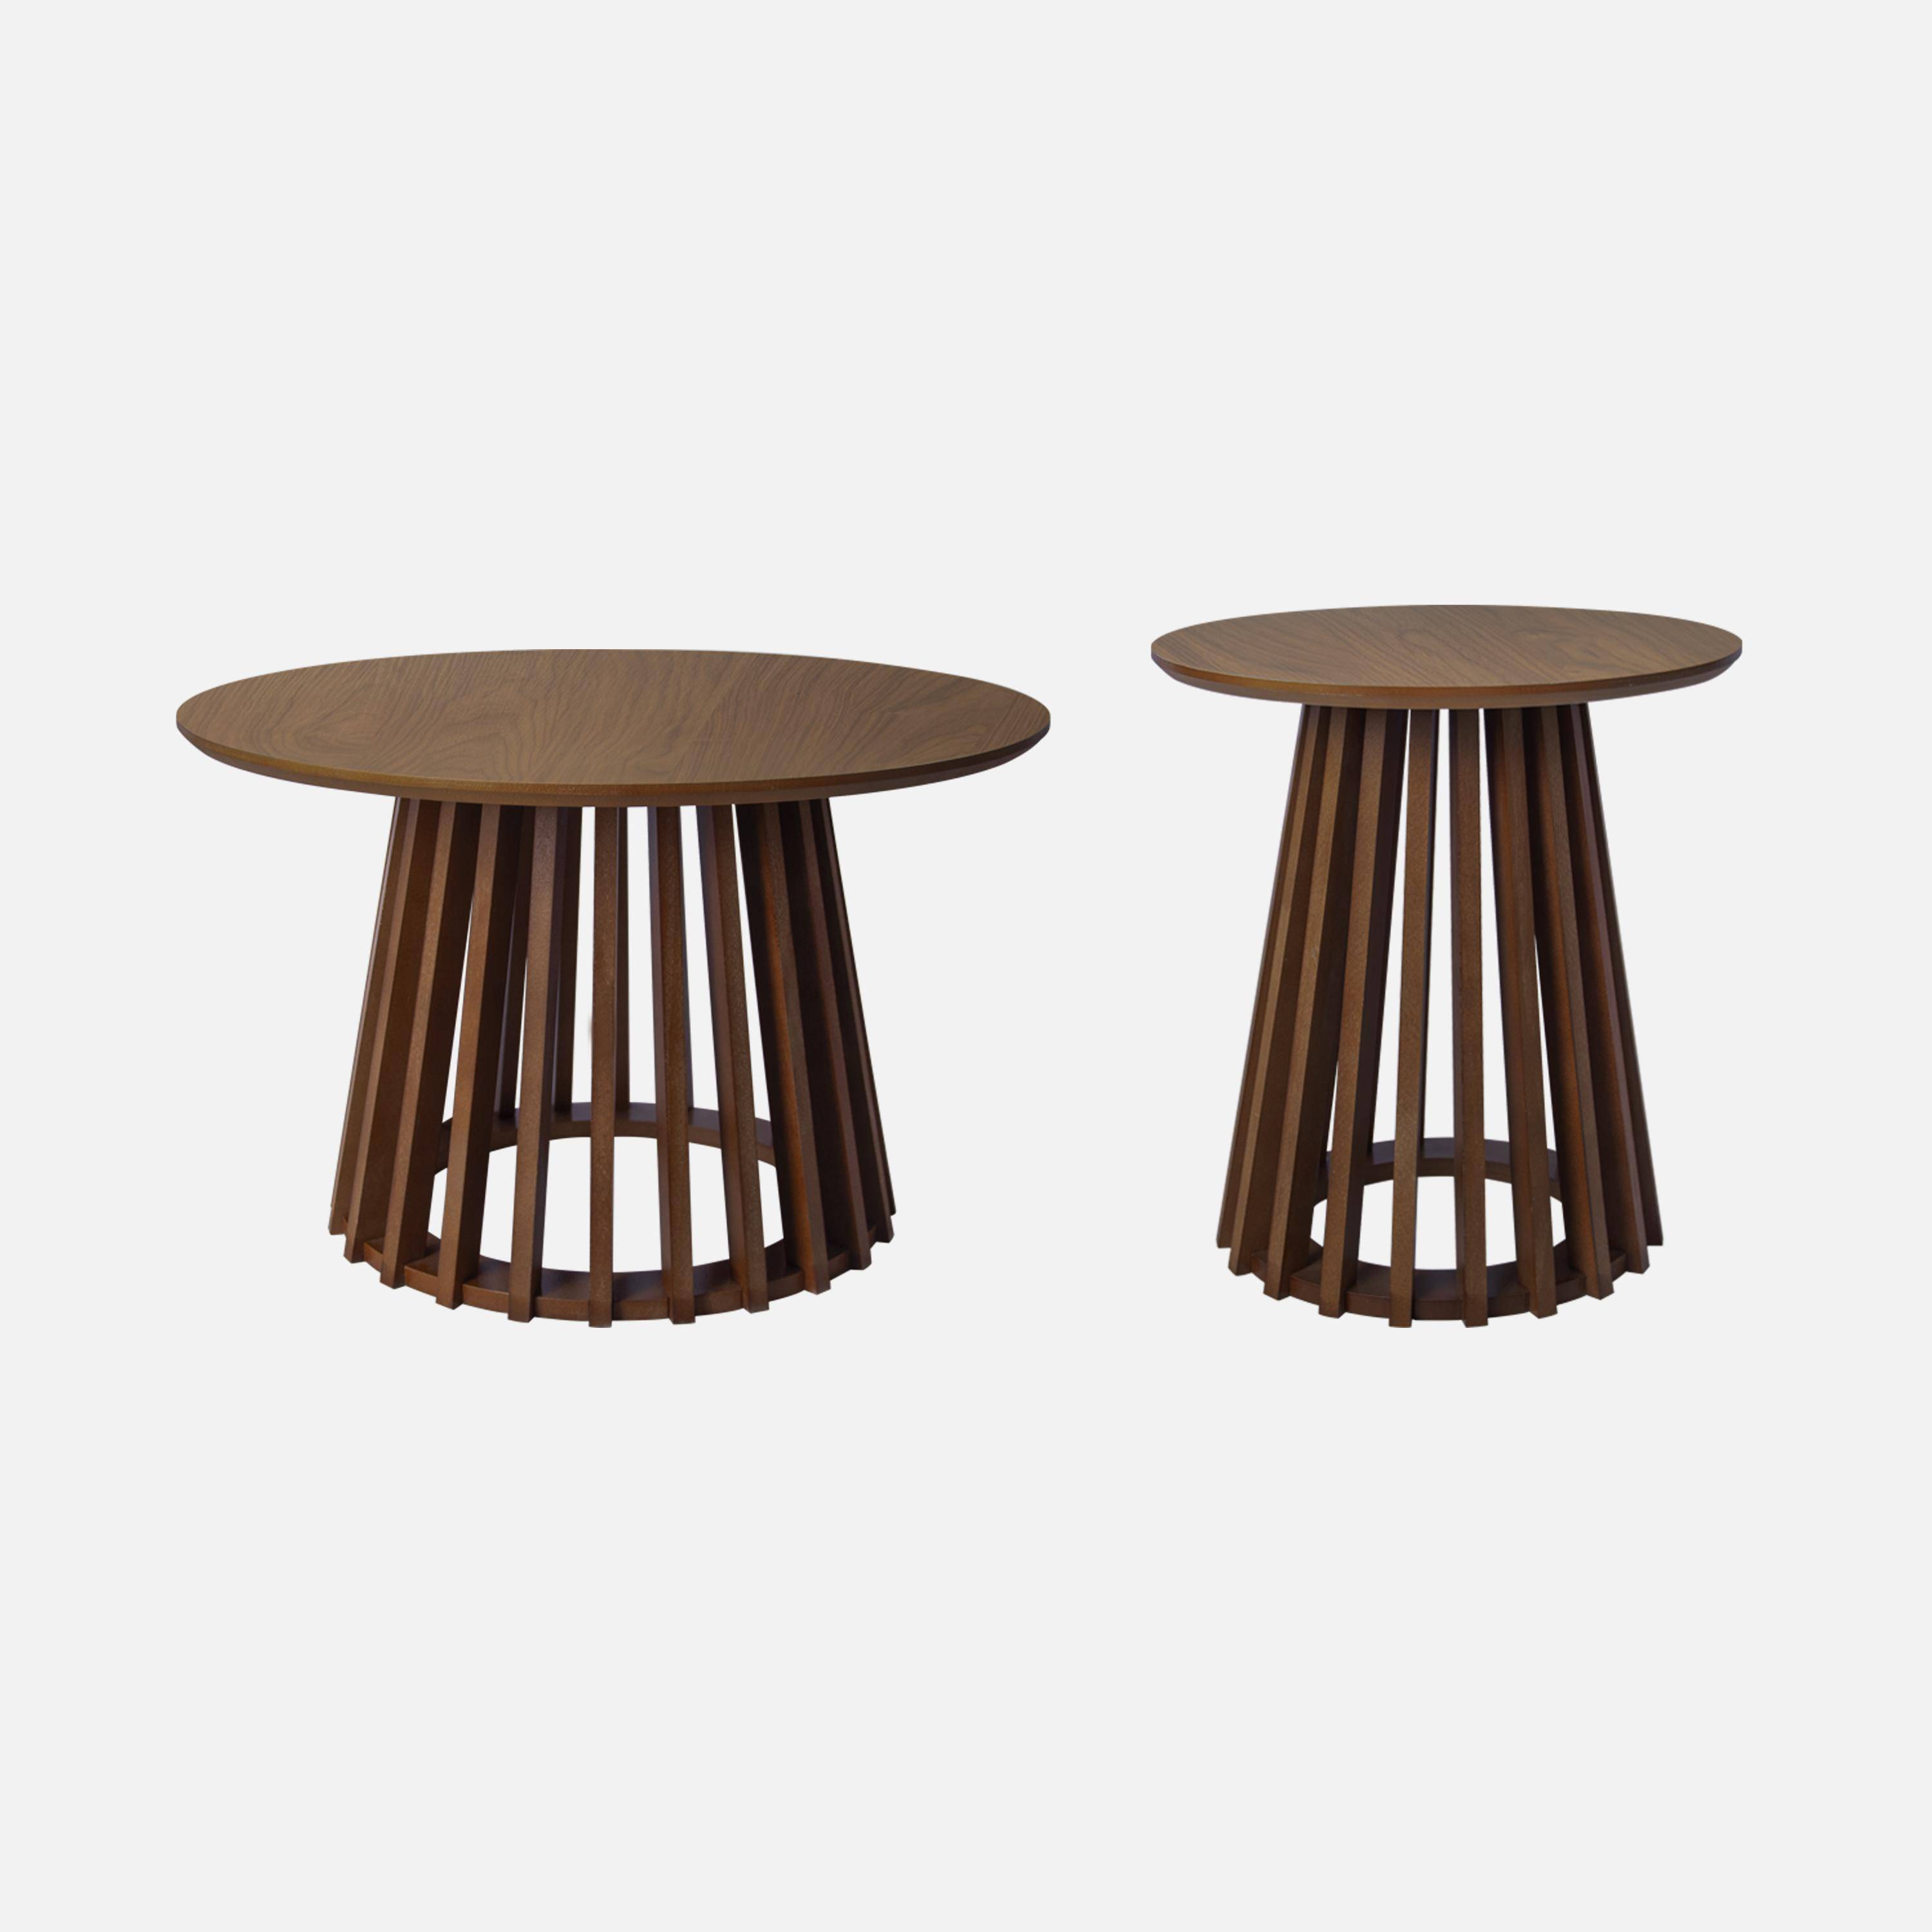 Set of 2 round coffee tables with walnut wood-effect top and fir wood legs, 40cm and 60cm Photo1